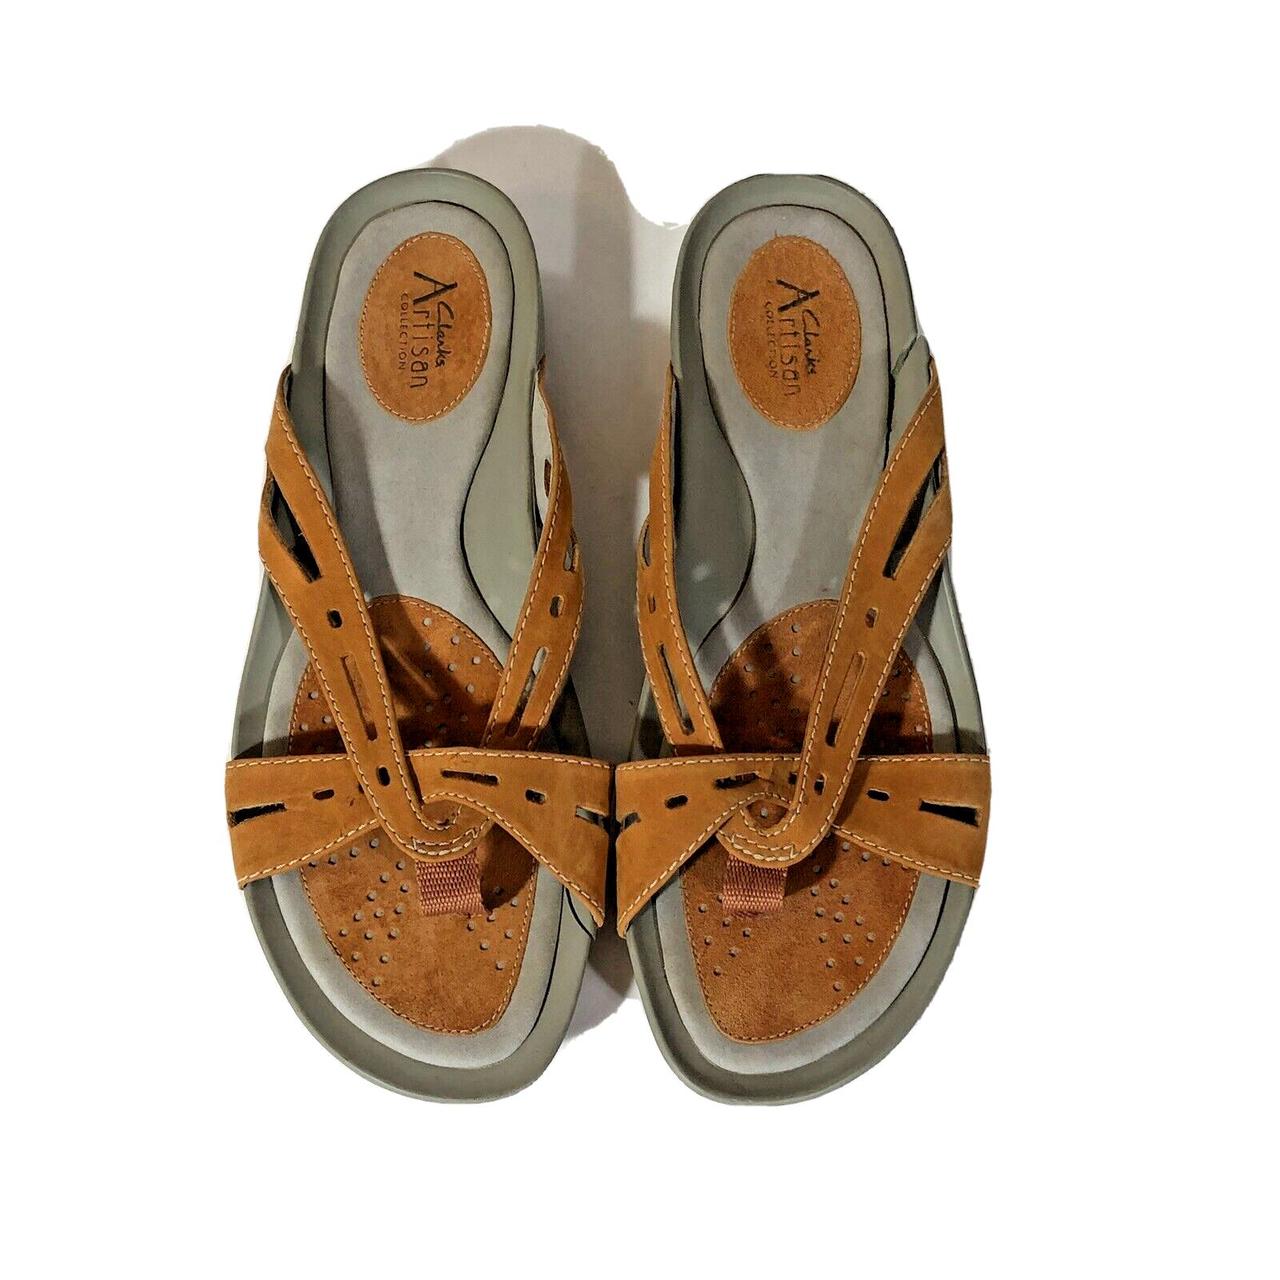 Collection by Clarks Tan Leather Sandal Ultimate Comfort Women Size 7. -  beyond exchange